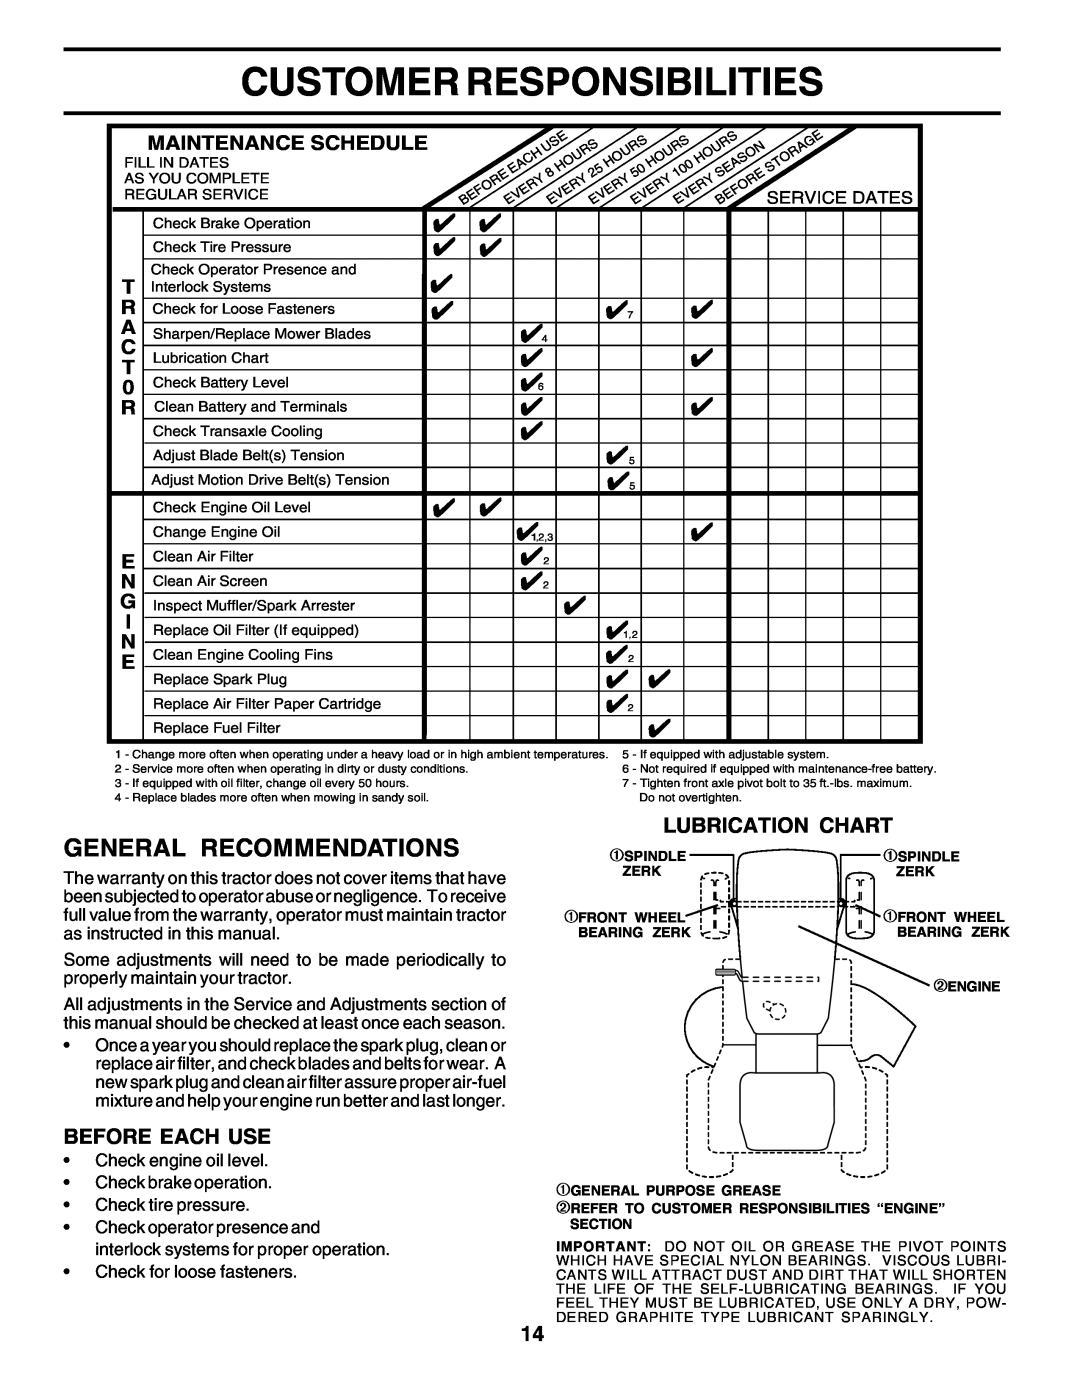 Poulan PO14542C manual Customer Responsibilities, General Recommendations, Before Each Use, Lubrication Chart 